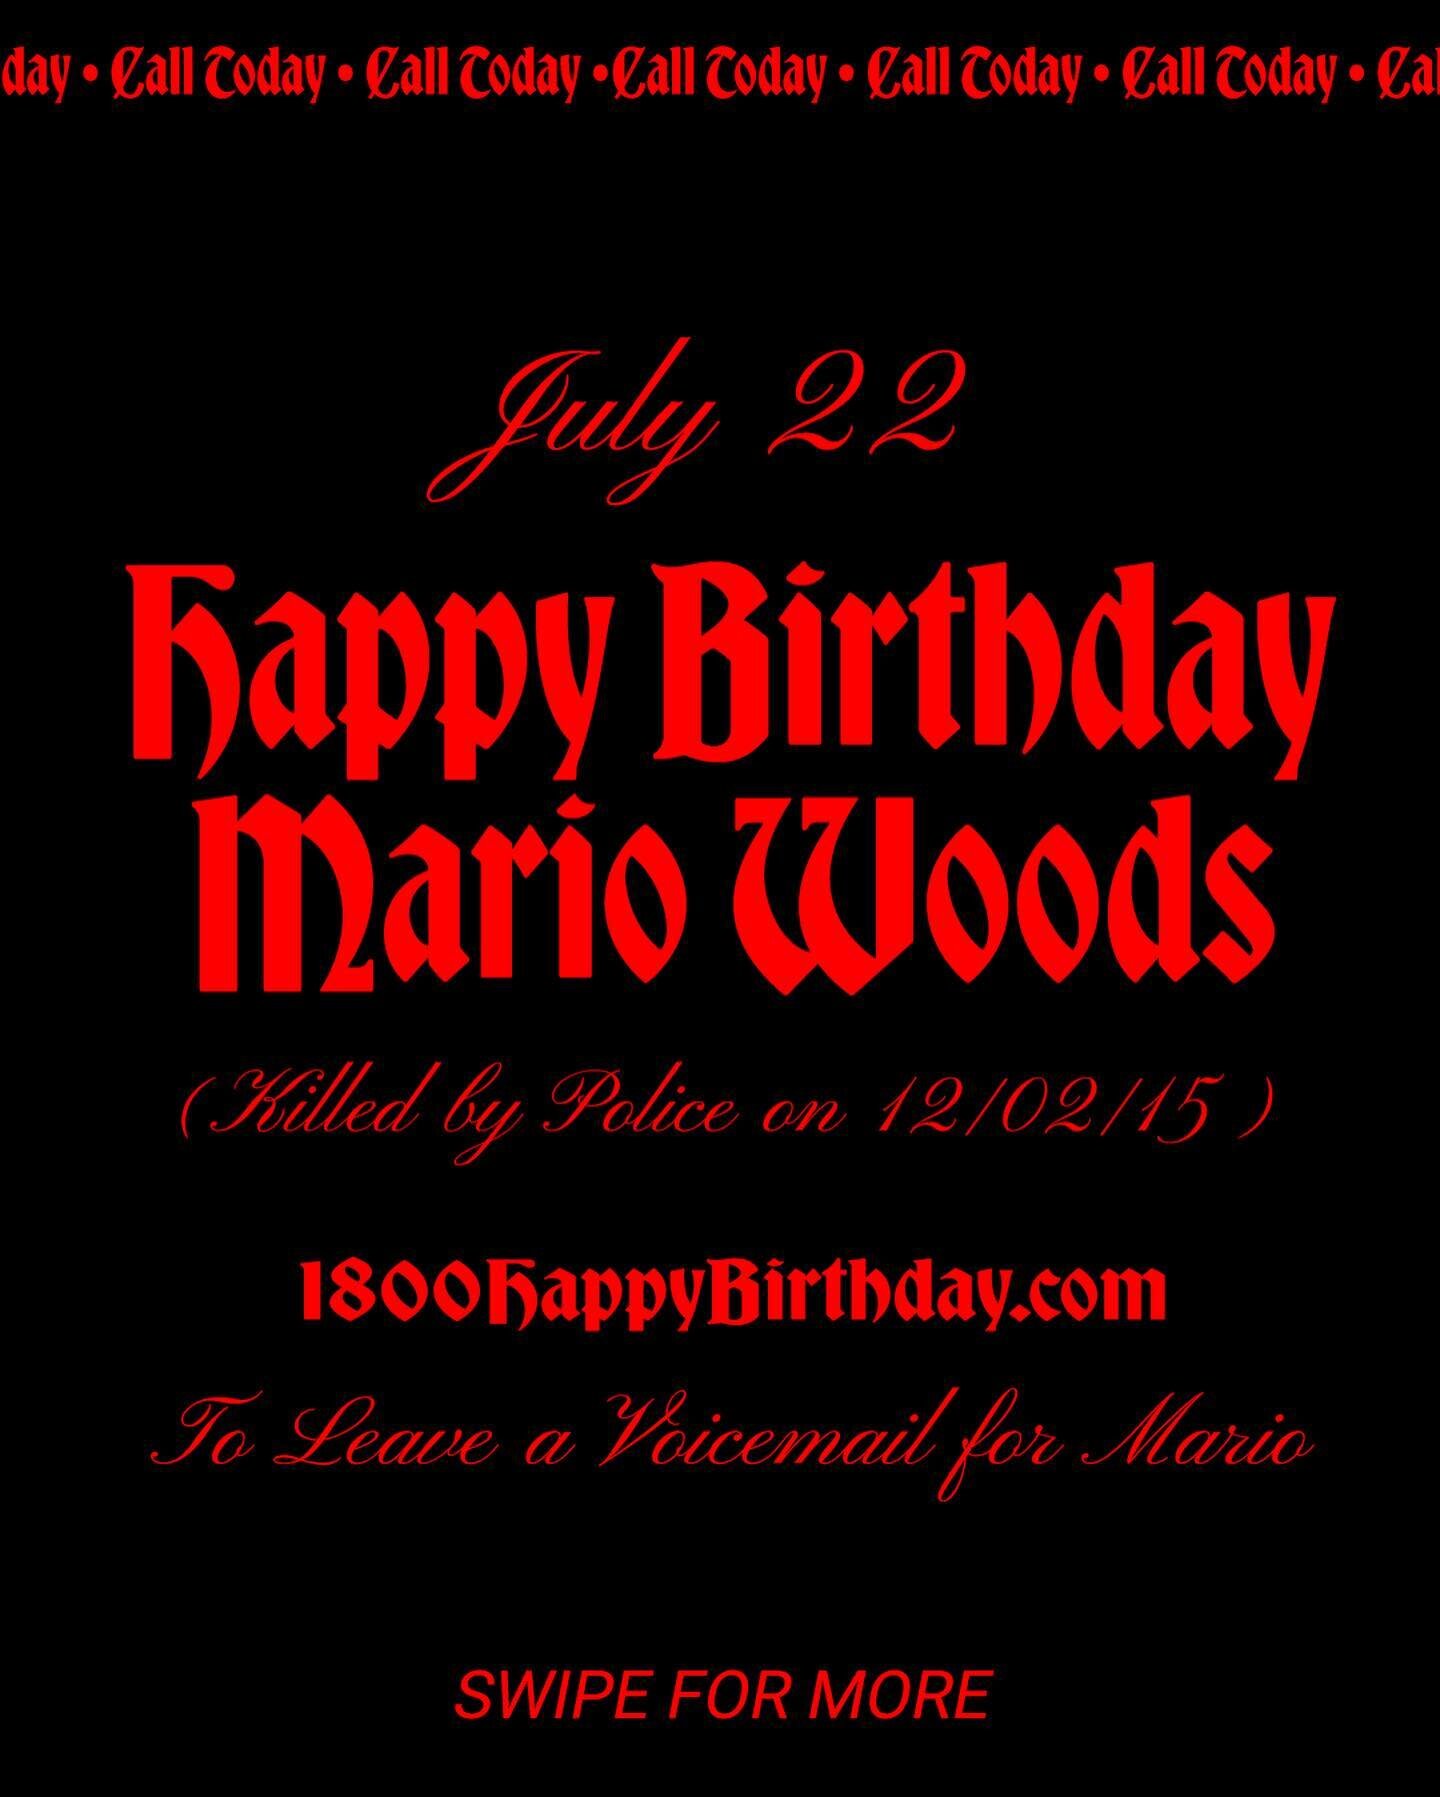 @evenoddfilms has launched @1800happybirthday where you can leave voicemails for the families of victims of police killings and systemic racism. 📞📞📞 Call today by visiting 1800HappyBirthday.com. Leave a voicemail for Mario Woods. Mario was killed 